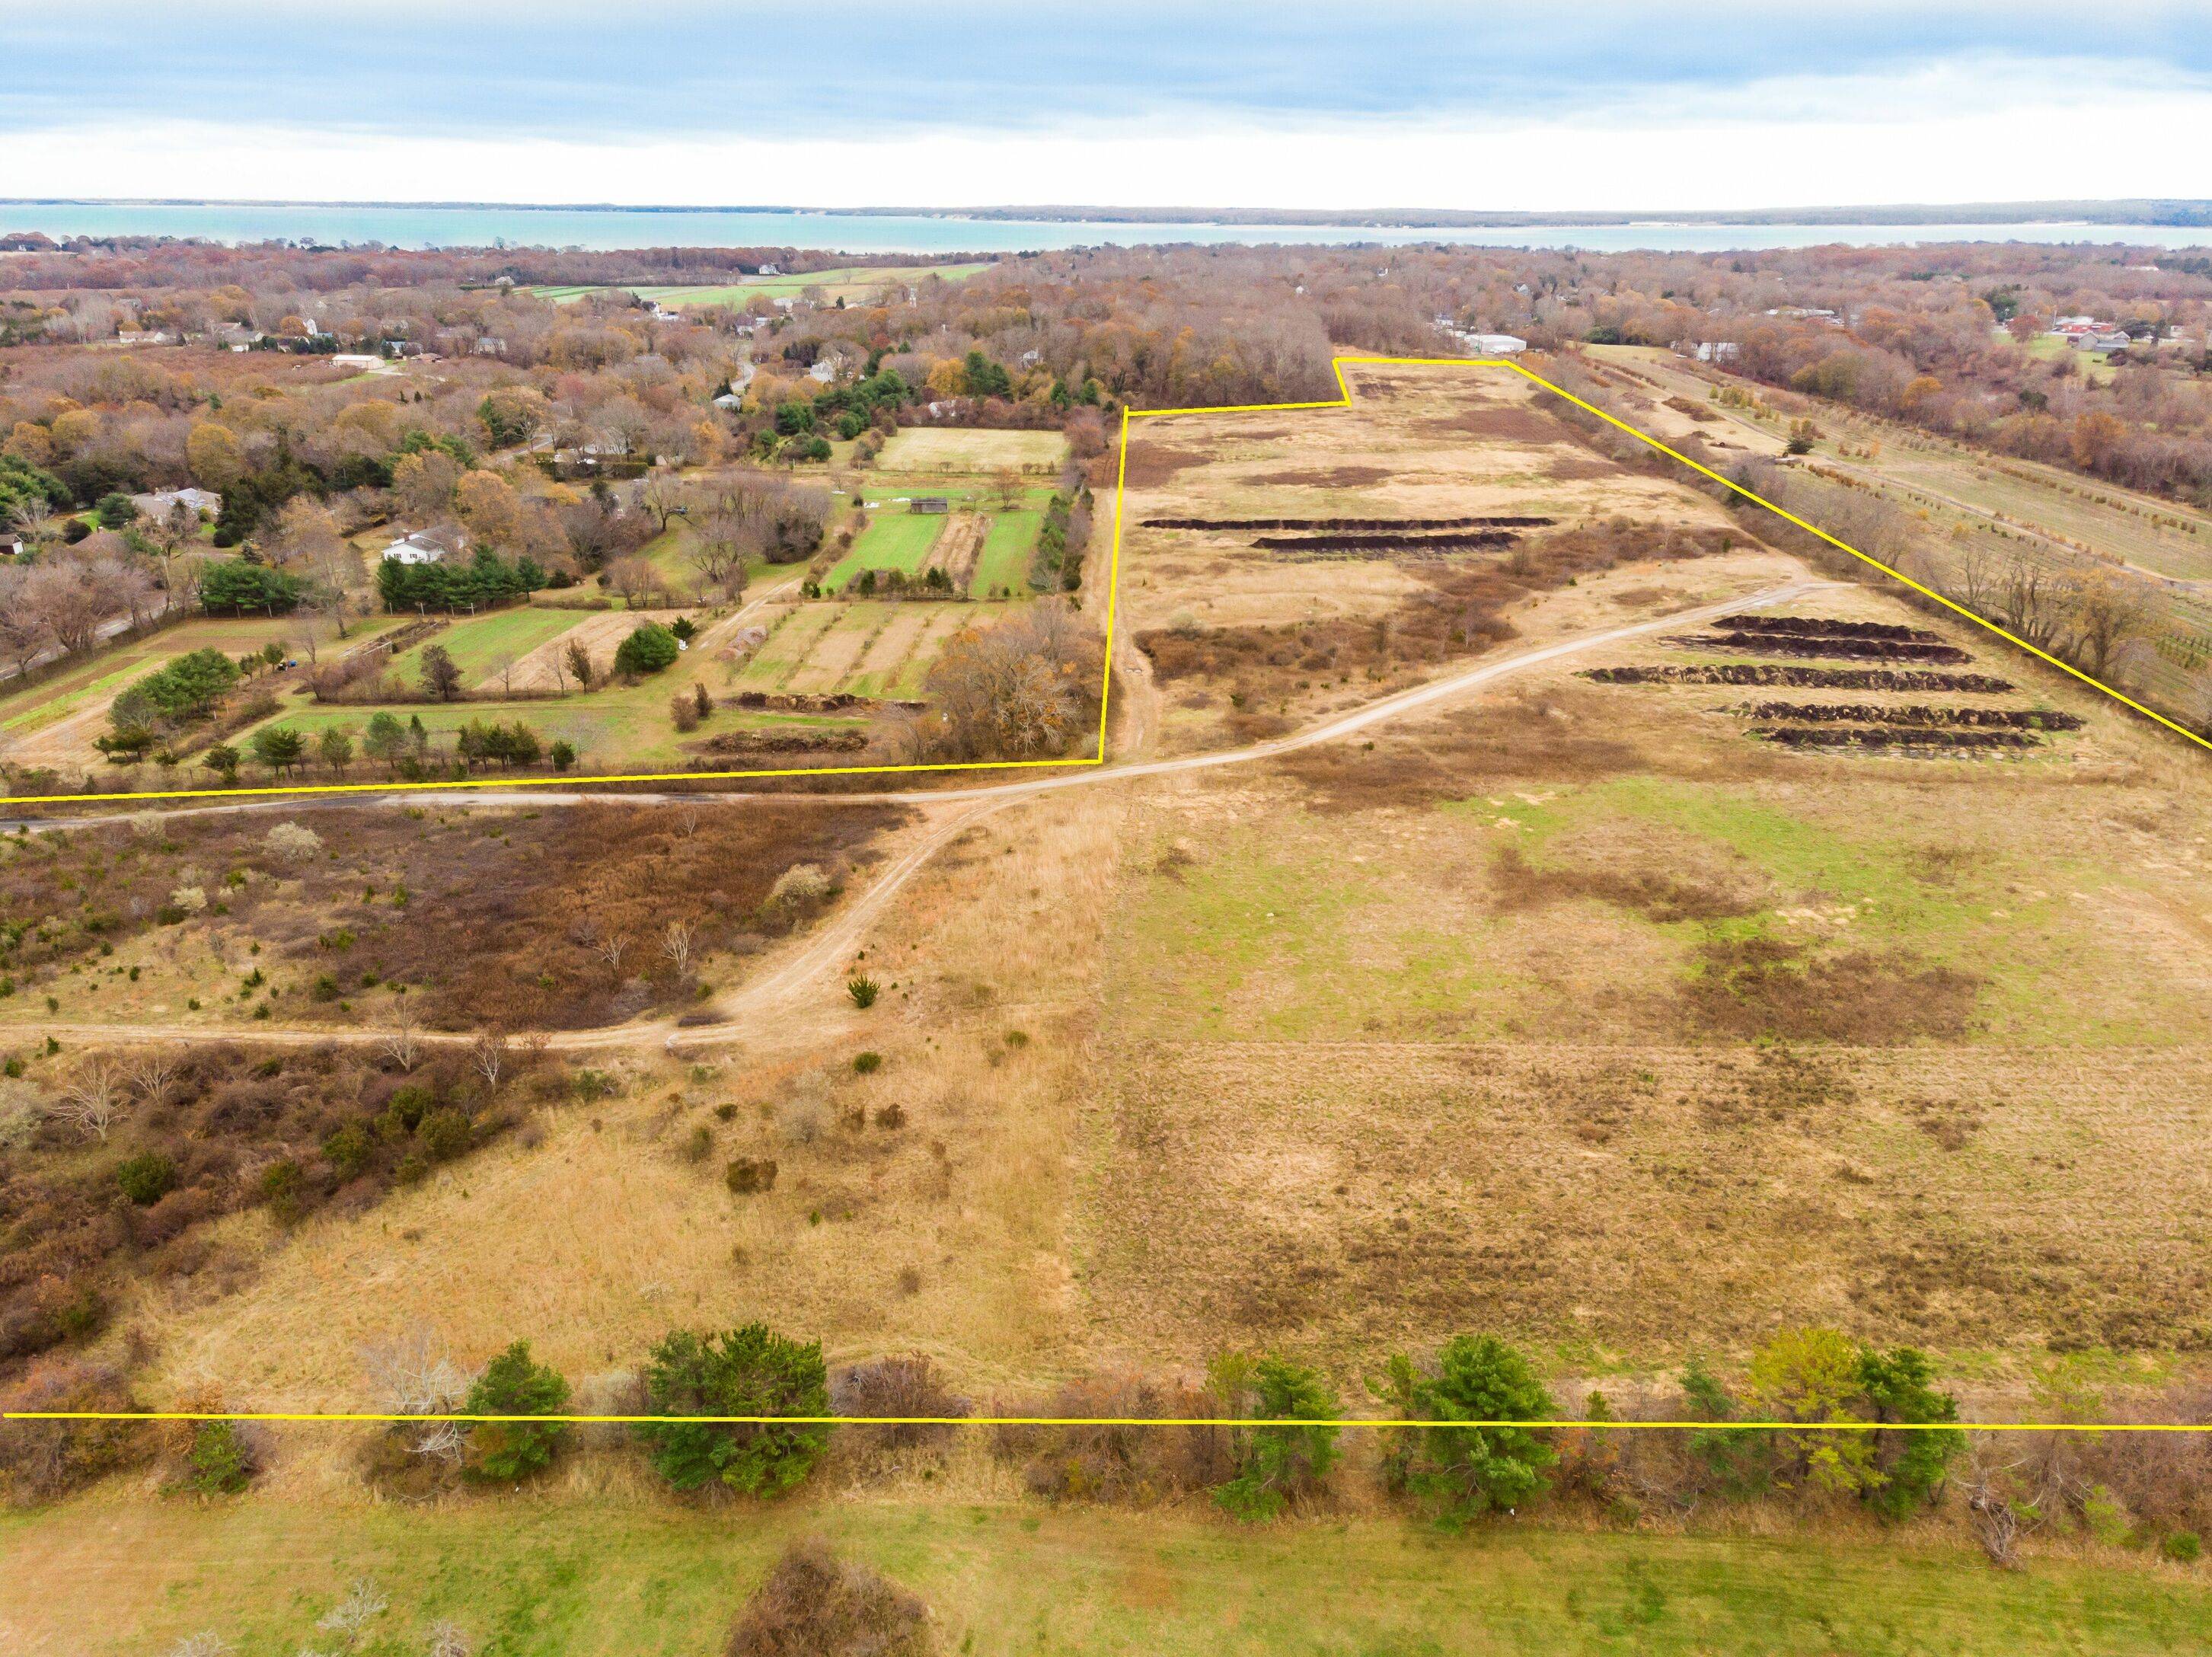 32.38 Acres of Vacant Agricultural Farmland with Flexible Use